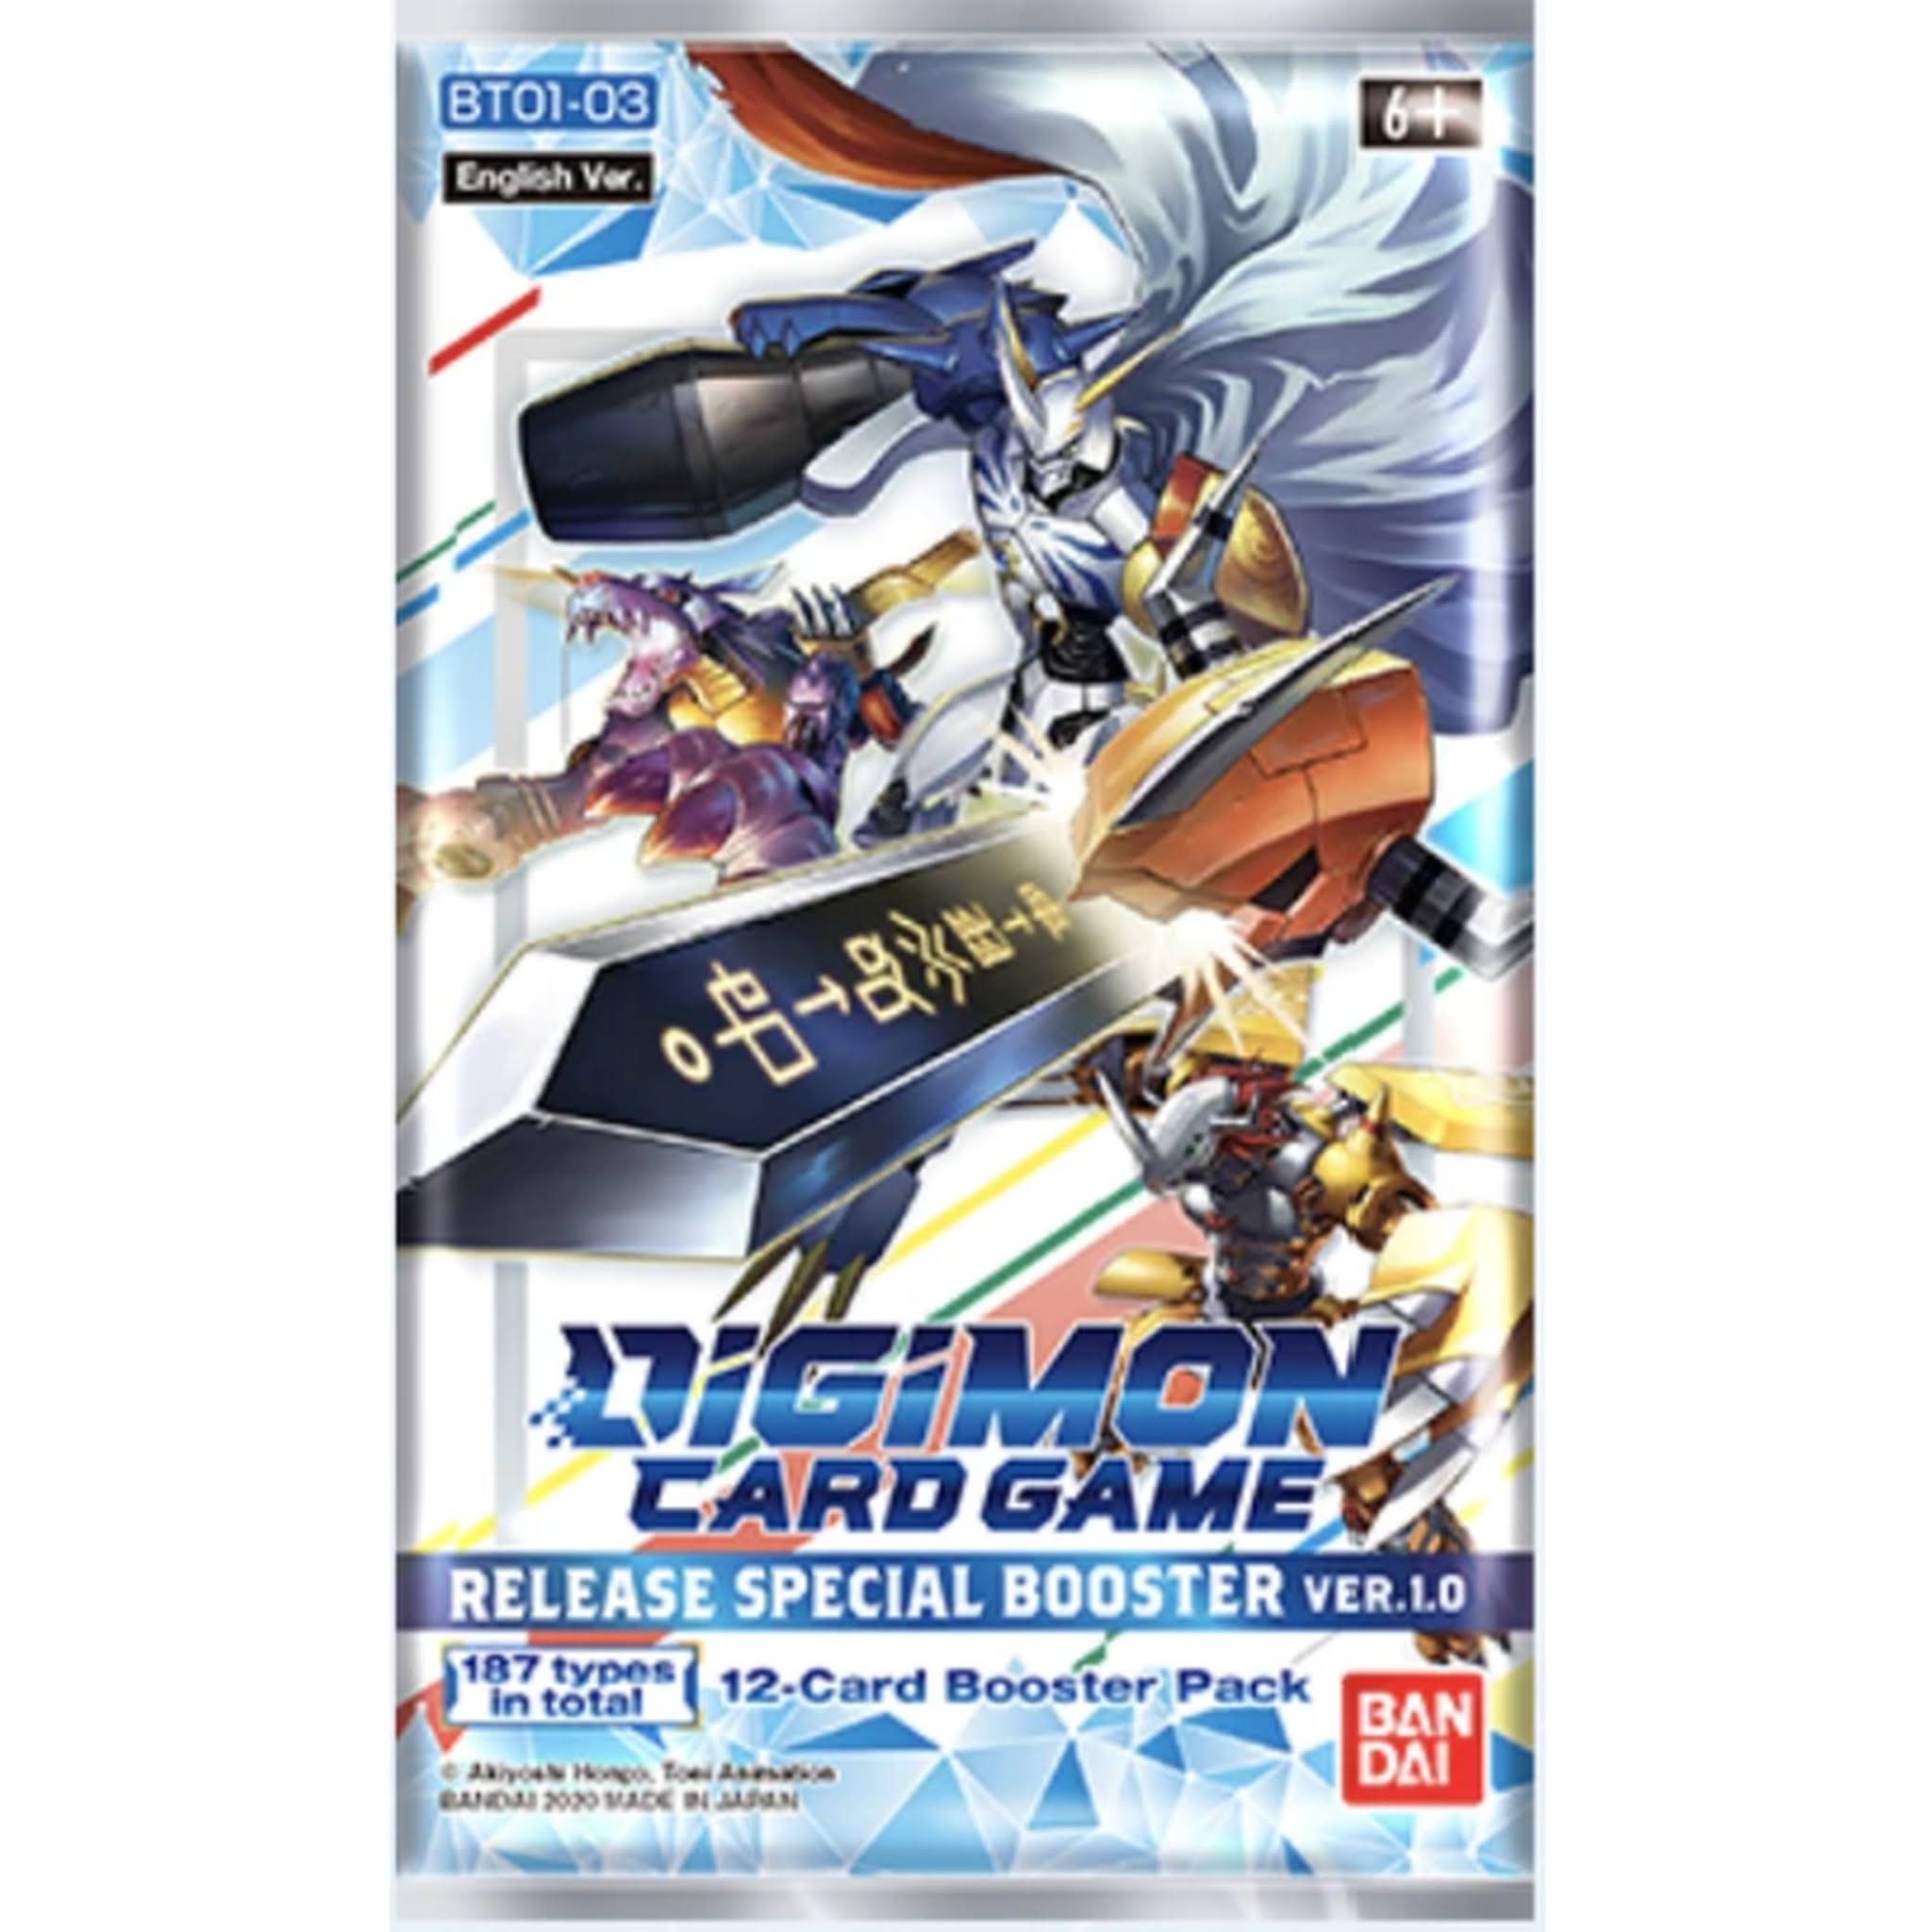 Digimon Card Game Series 01 Special Booster Ver 1